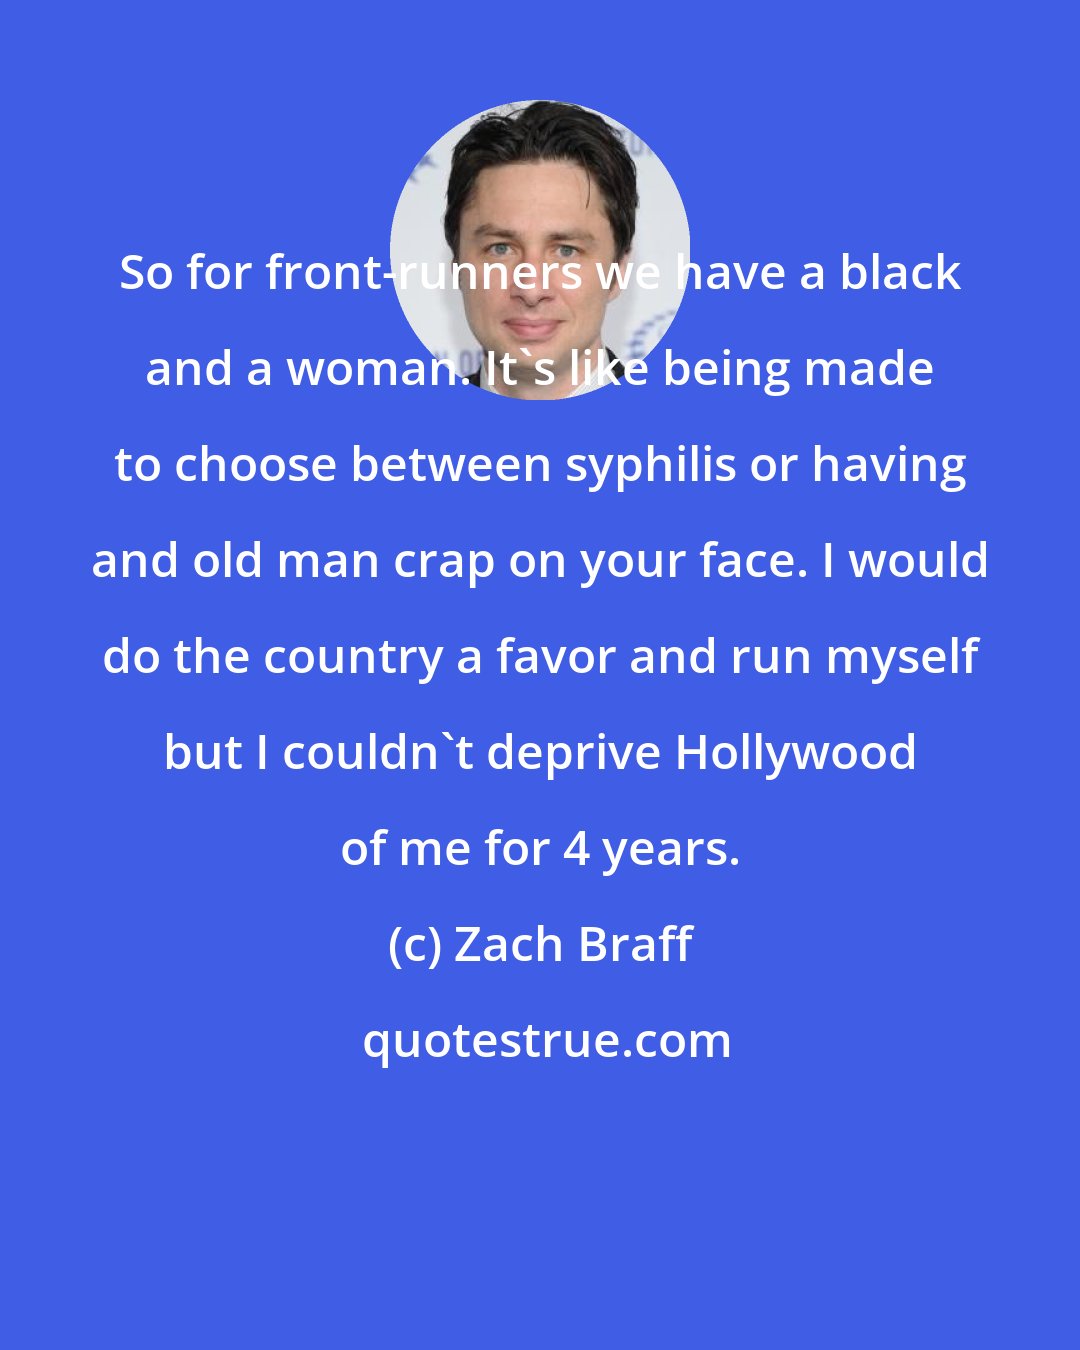 Zach Braff: So for front-runners we have a black and a woman. It's like being made to choose between syphilis or having and old man crap on your face. I would do the country a favor and run myself but I couldn't deprive Hollywood of me for 4 years.